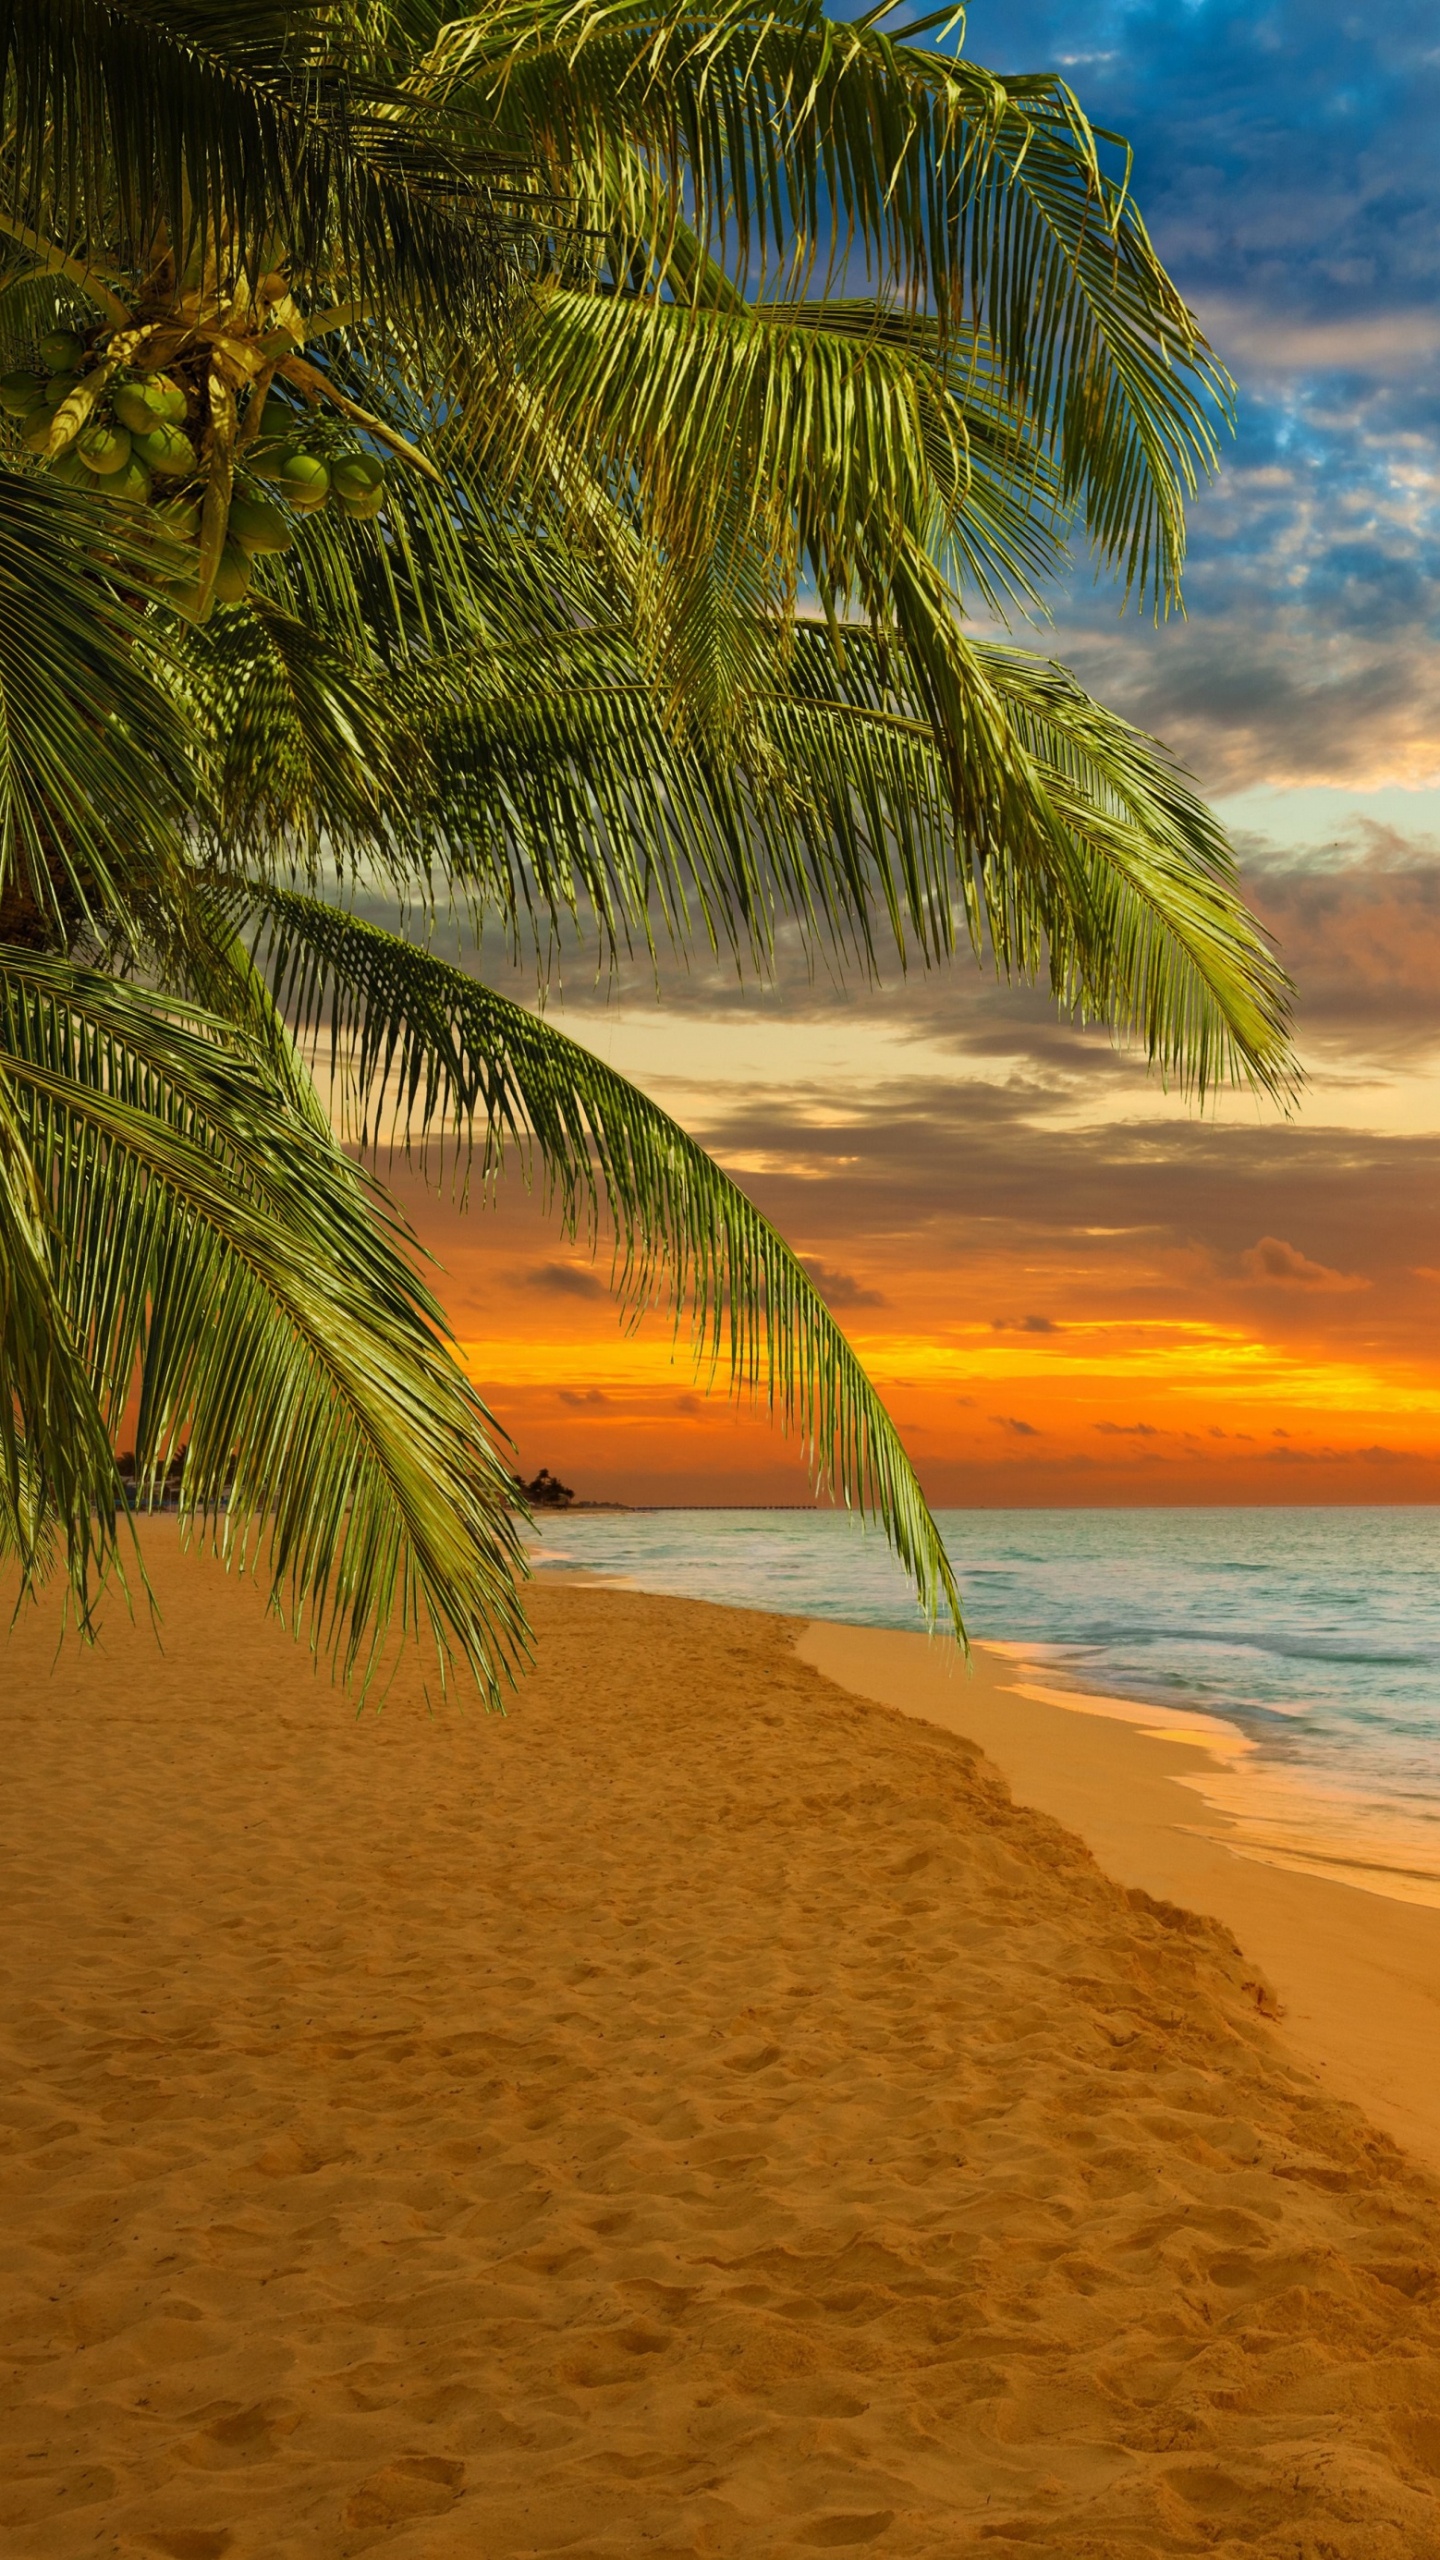 Palm Tree on Beach Shore During Sunset. Wallpaper in 1440x2560 Resolution